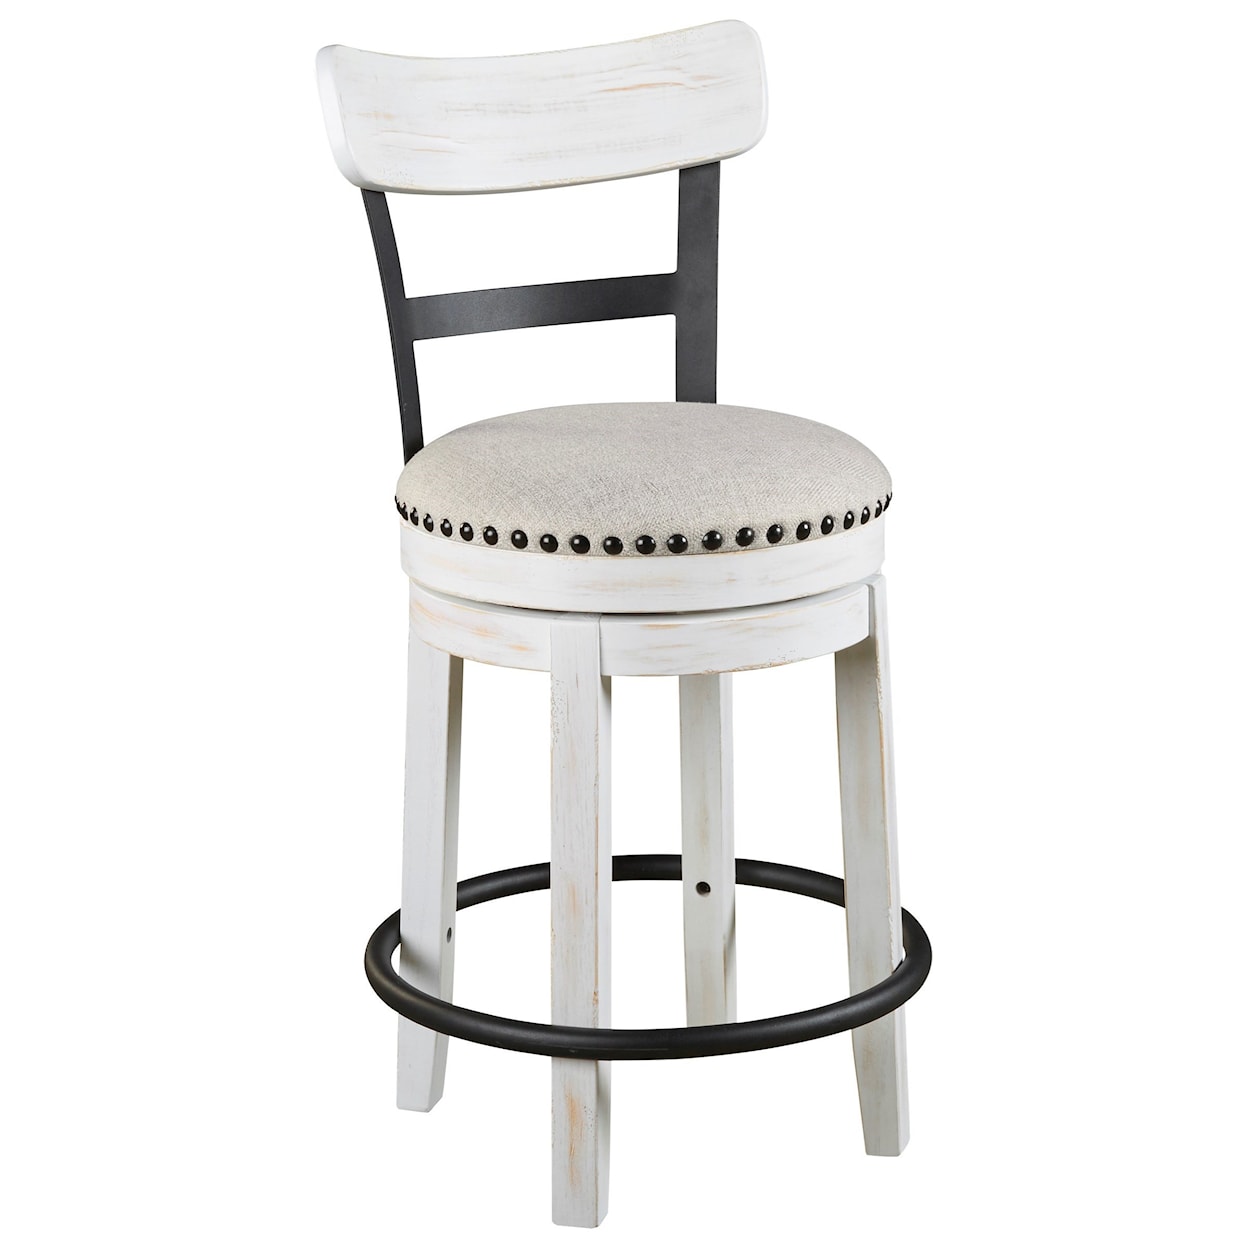 Signature Design by Ashley Valebeck Counter Height Swivel Barstool